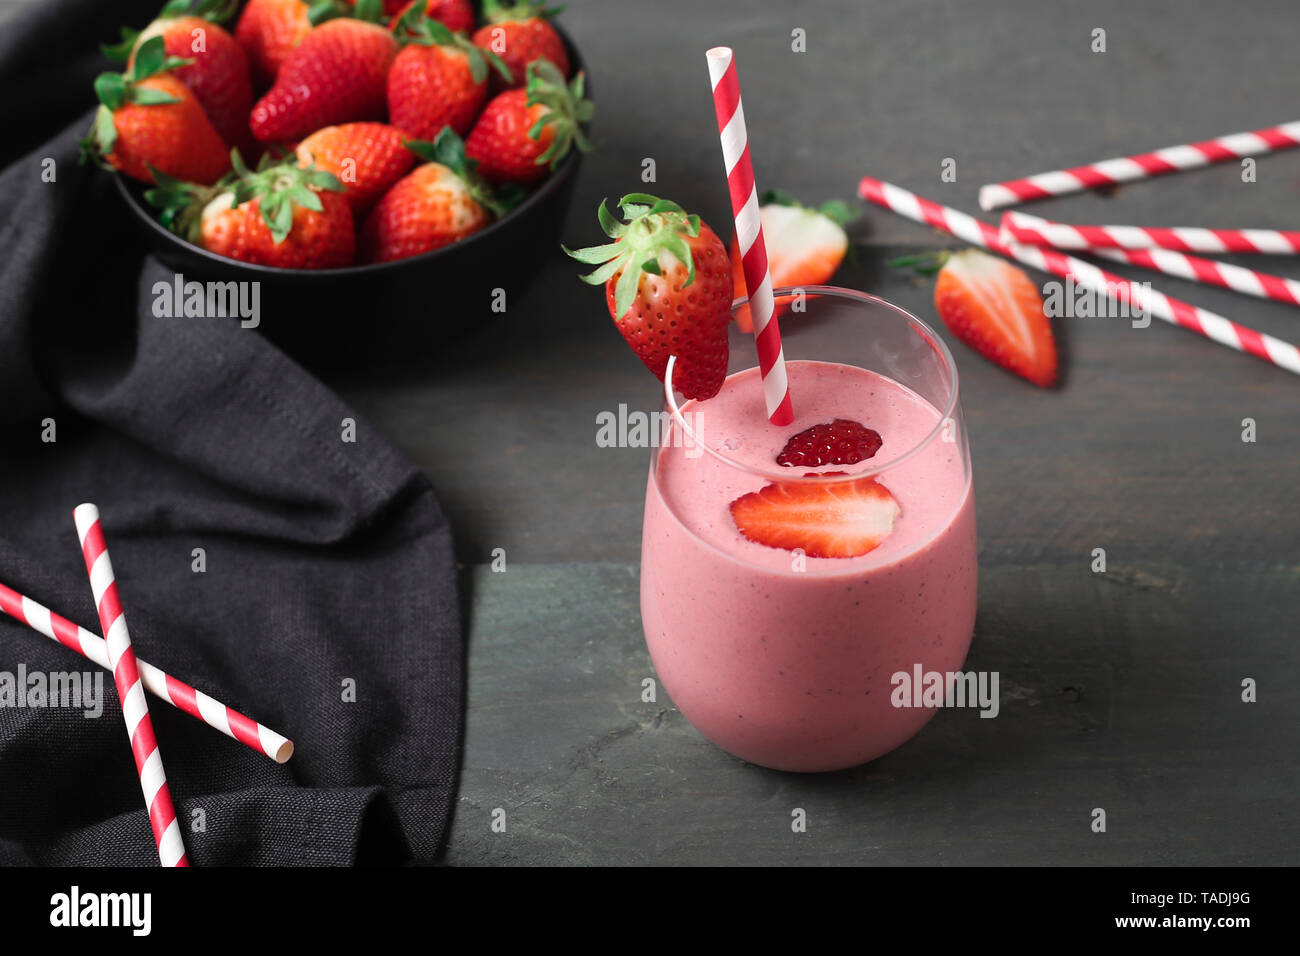 Glasses of strawberry smoothie and strawberries on dark wood Stock Photo